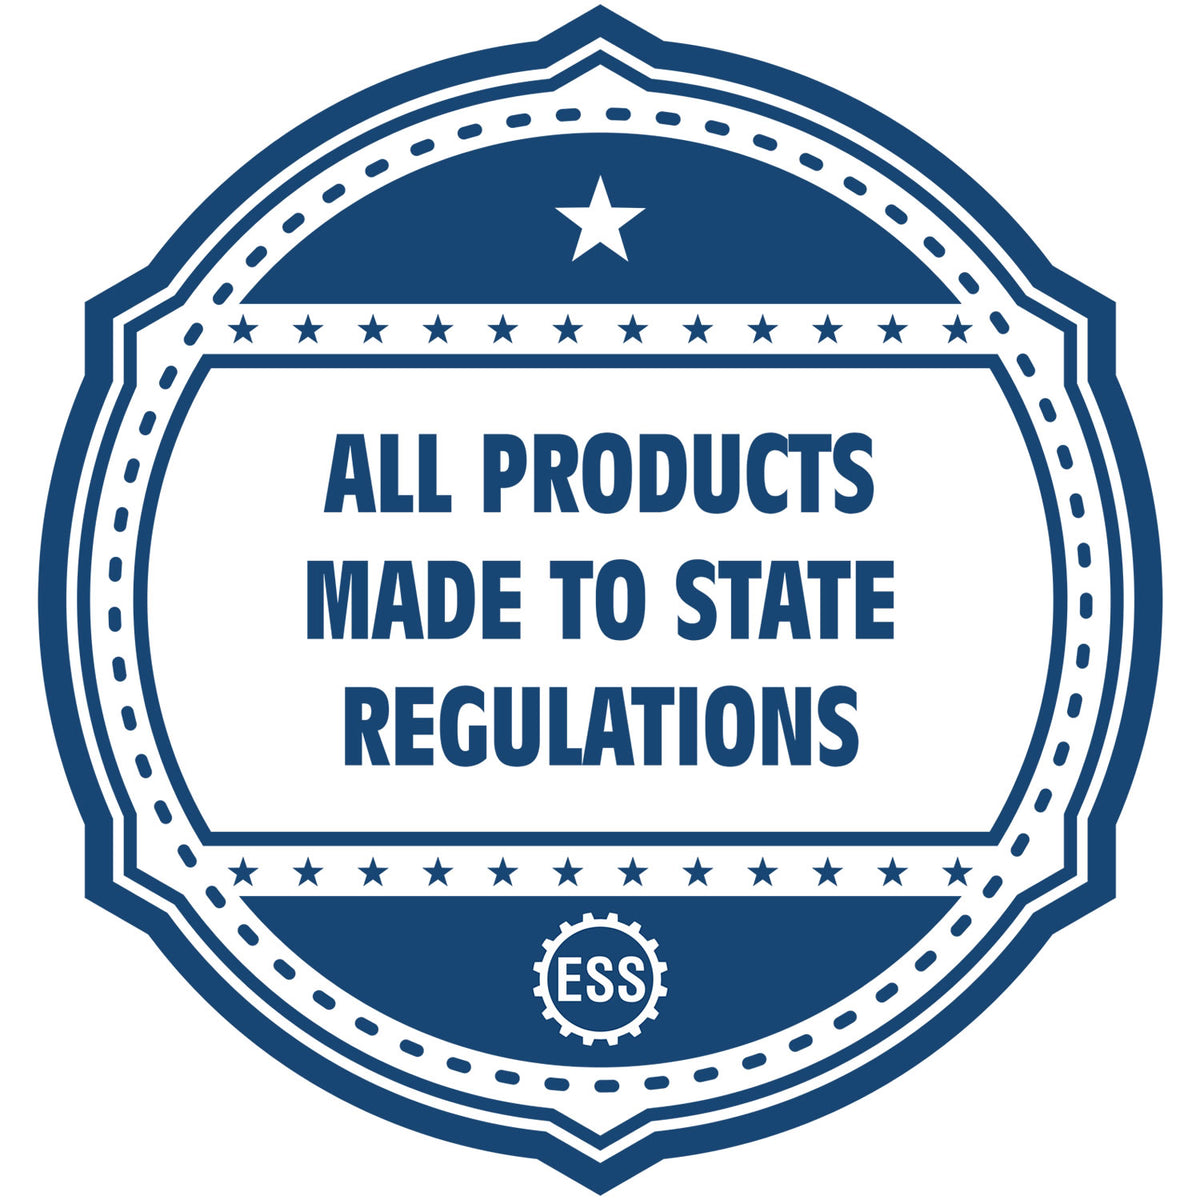 An icon or badge element for the Heavy Duty Cast Iron North Carolina Engineer Seal Embosser showing that this product is made in compliance with state regulations.